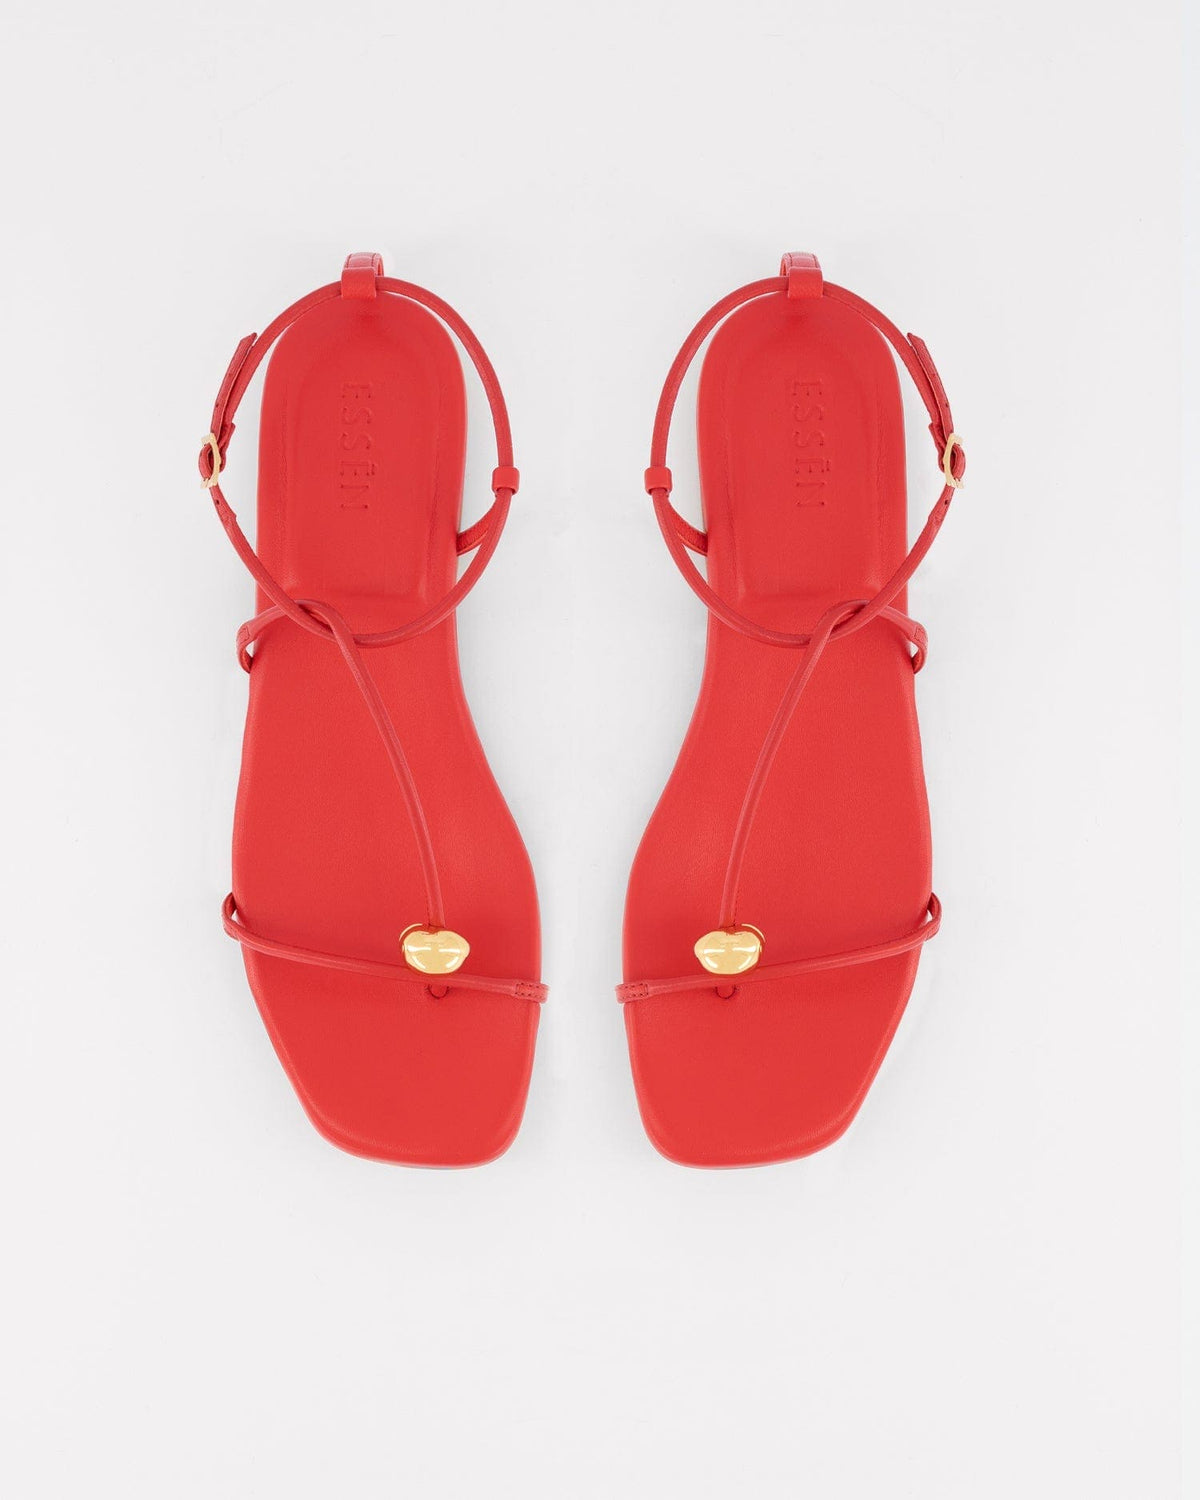 quiet luxury red leather strappy sandals